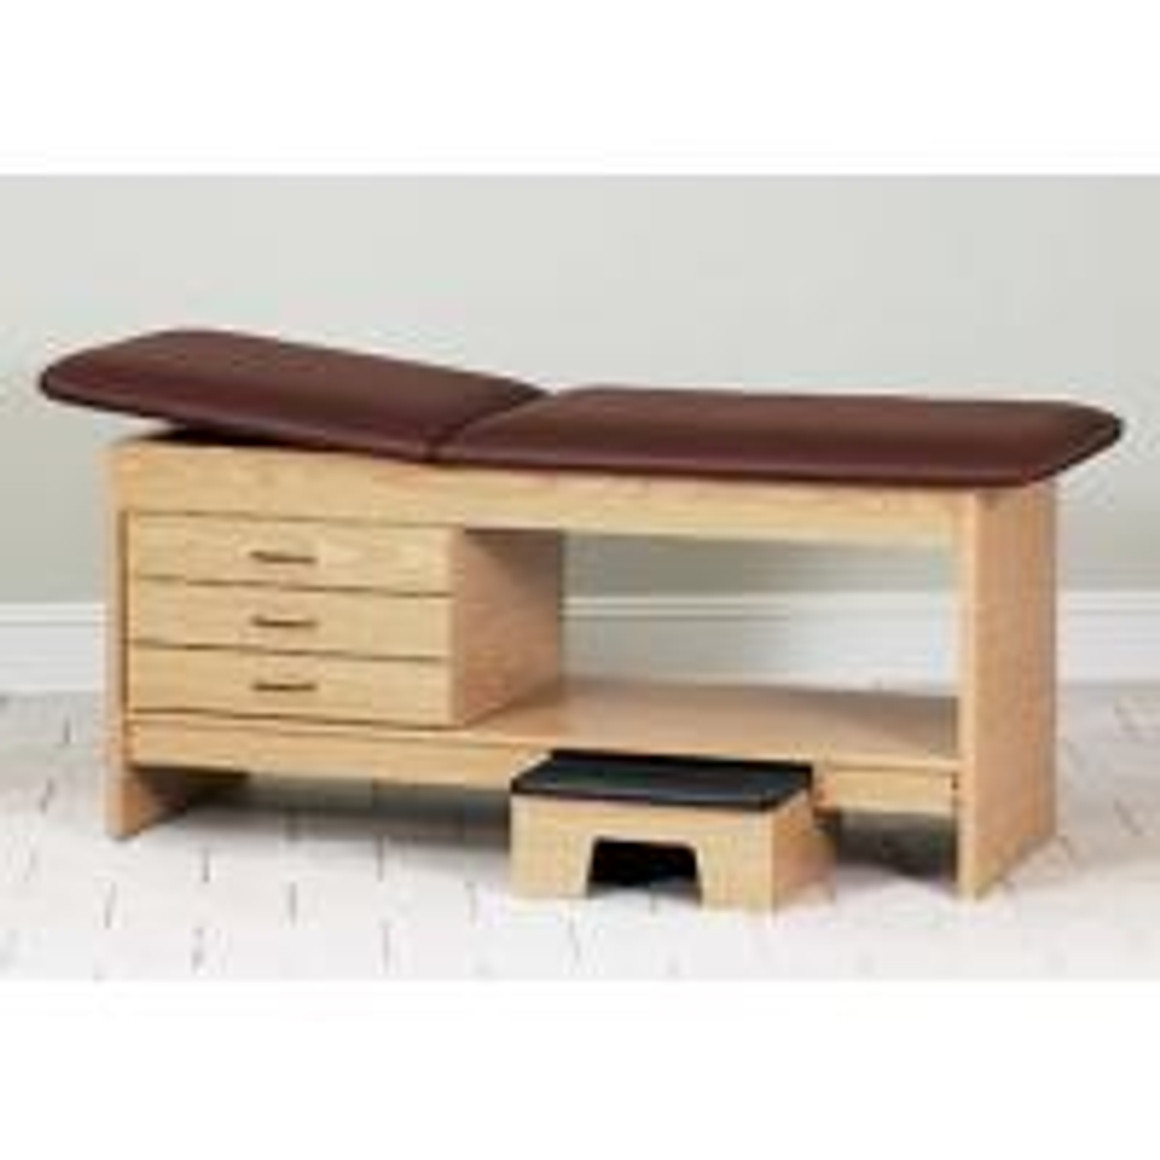 Clinton Styleline Laminate Treatment Table with Stool, 27" Wide, Burgundy